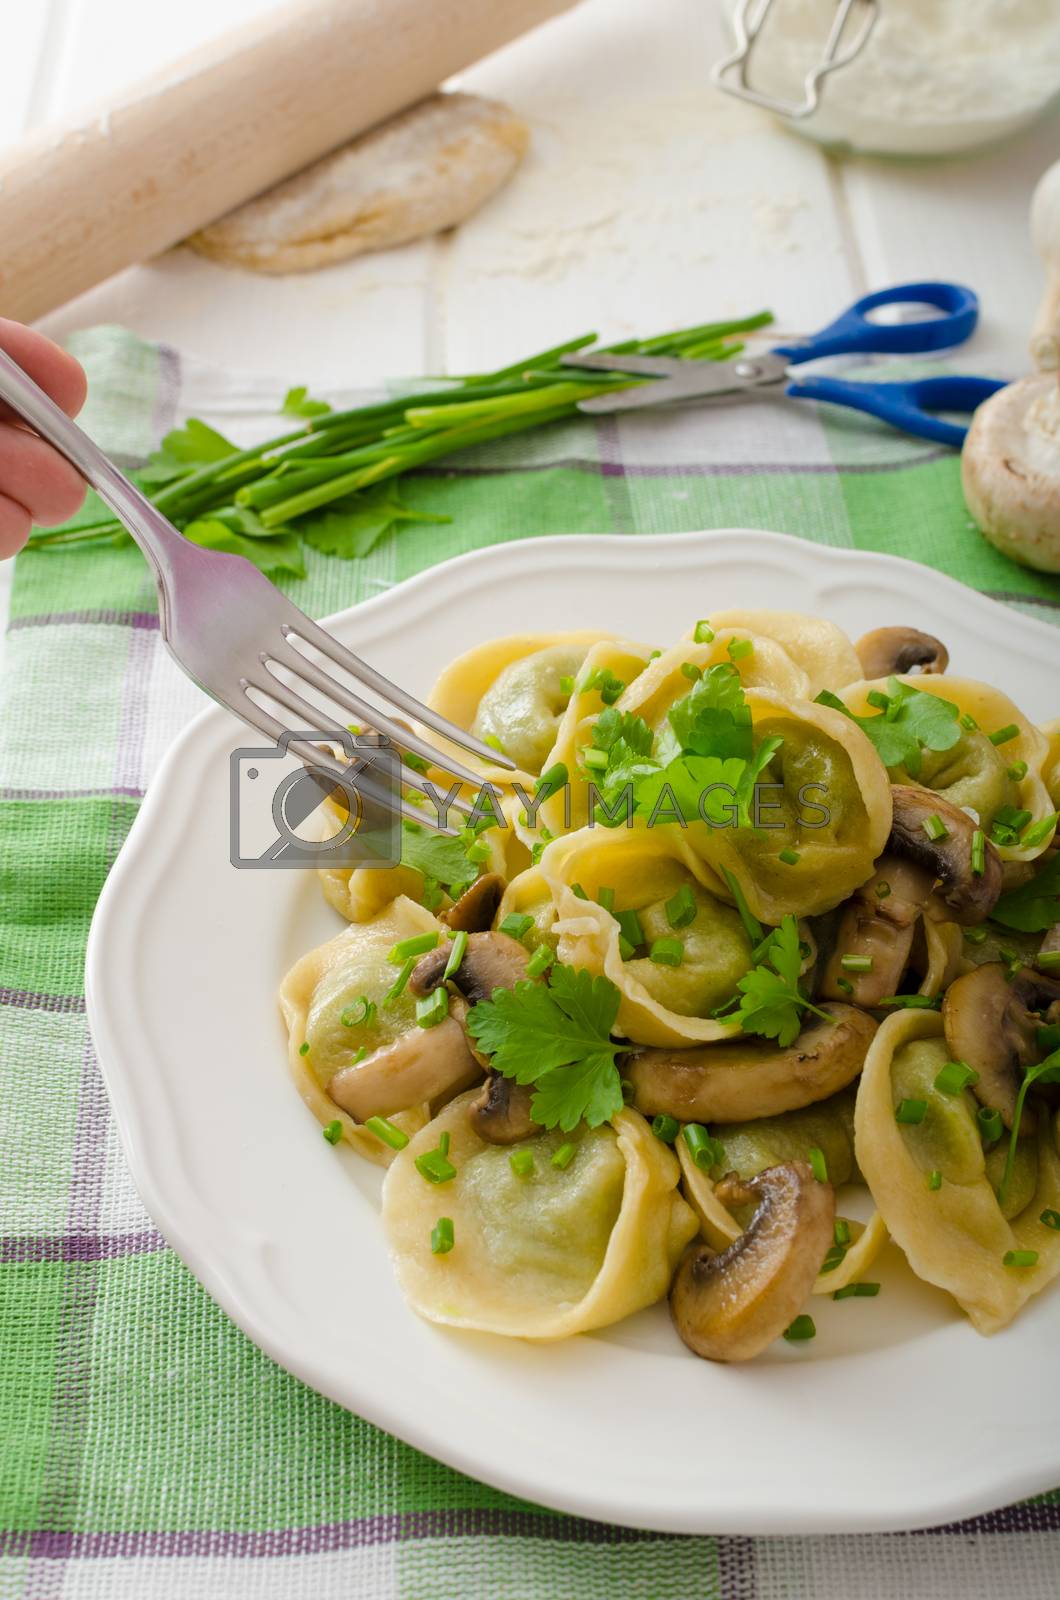 Royalty free image of Homemade tortellini with mushrooms and herbs by Peteer